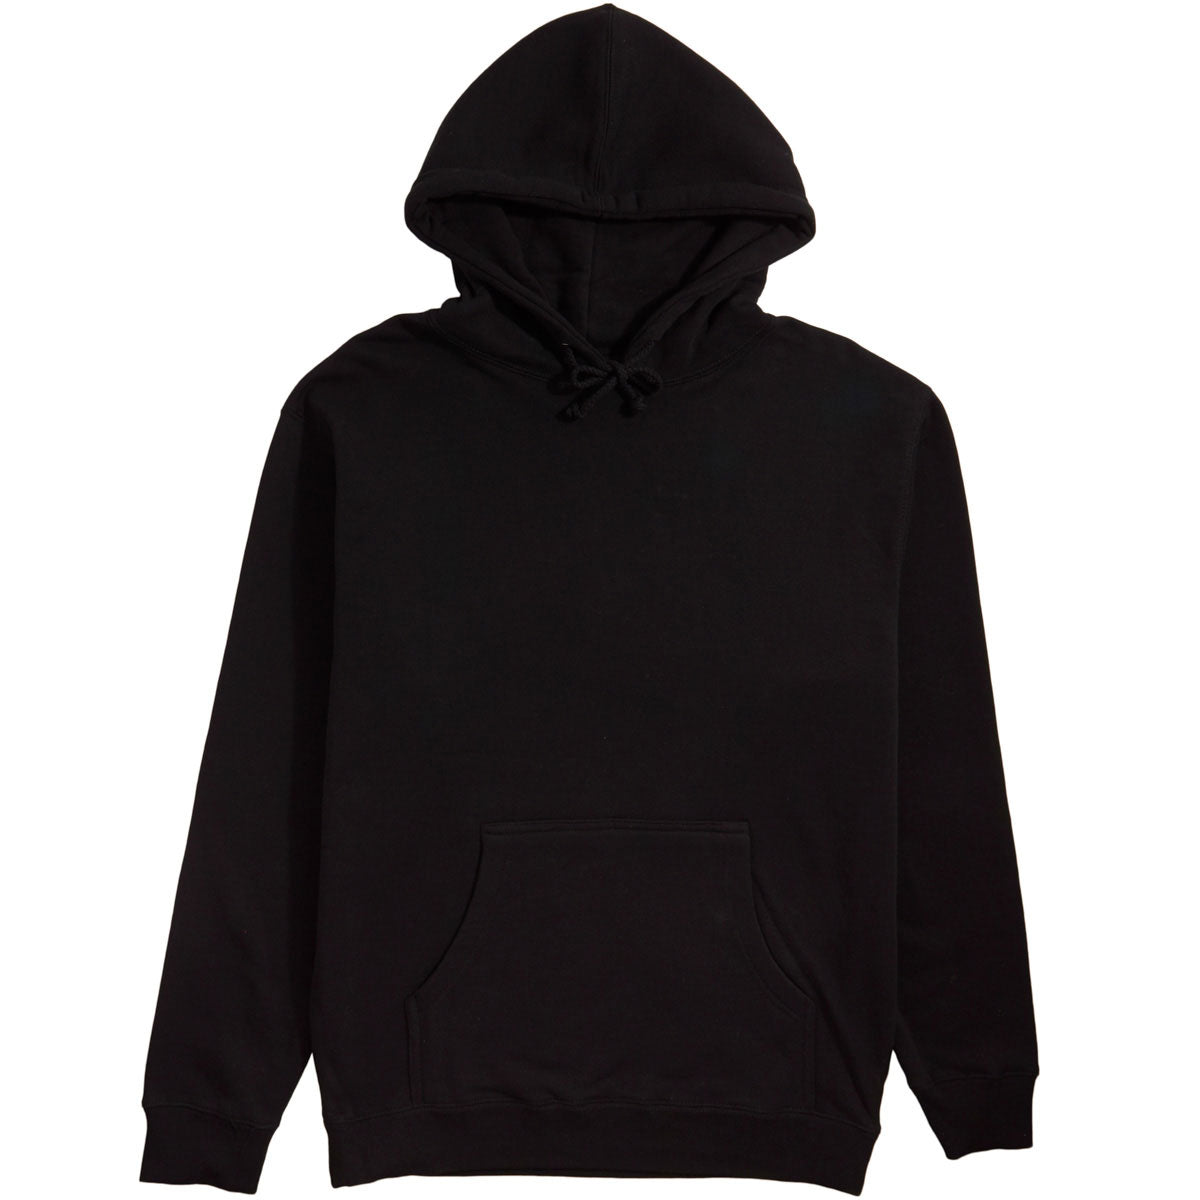 Converse Body Horror Pullover Hoodie - Black - MD image 1